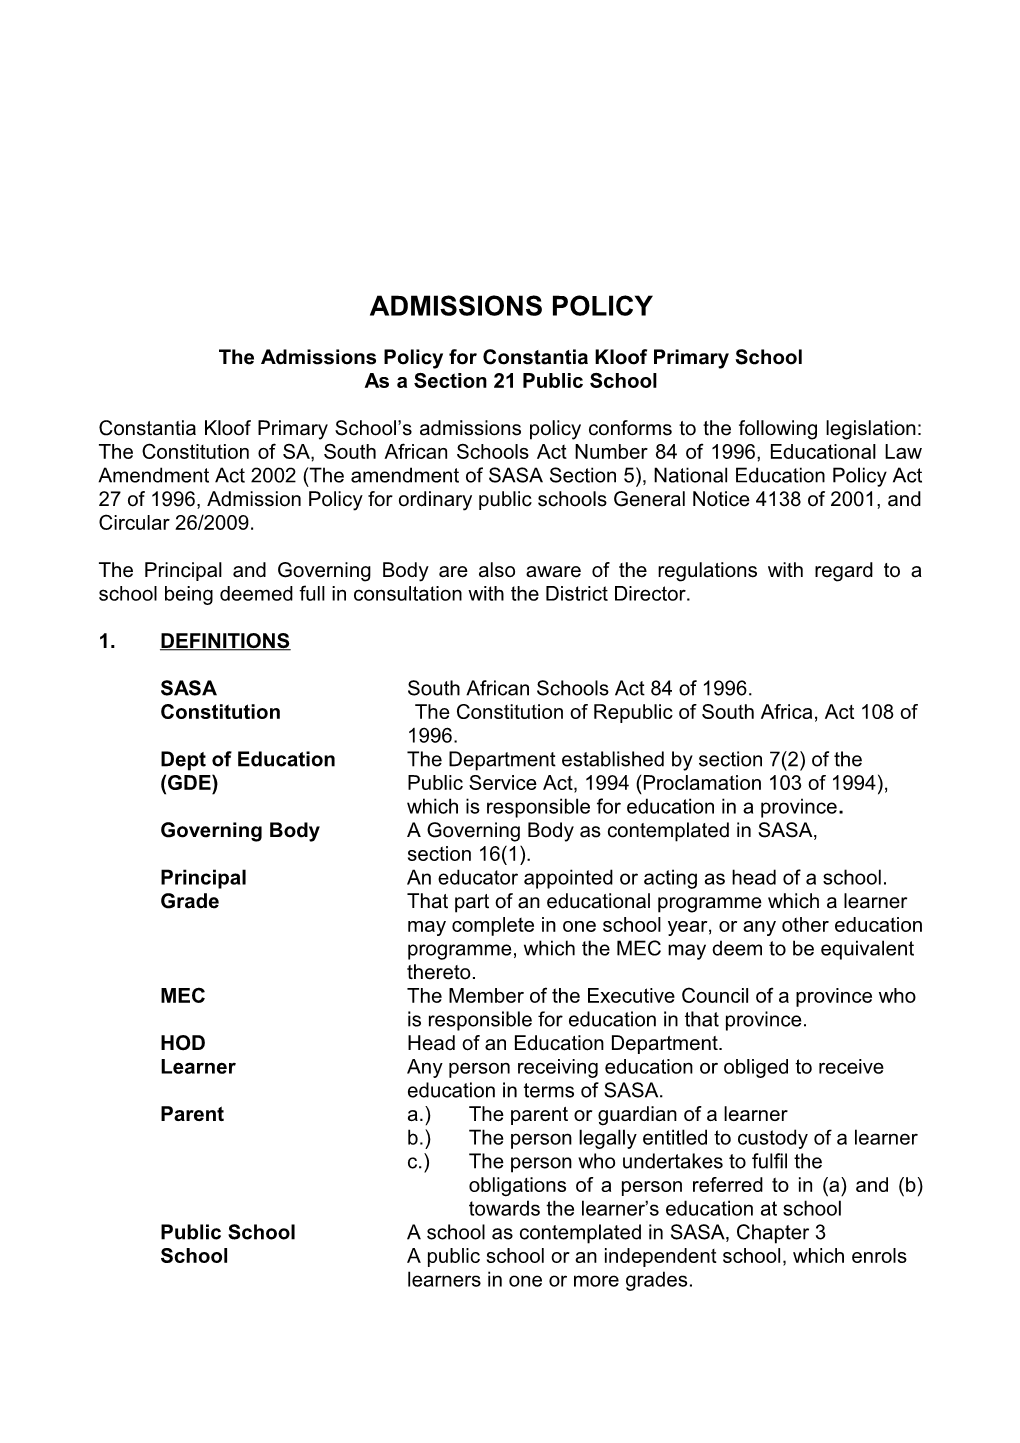 The Admissions Policy for Constantia Kloof Primary School